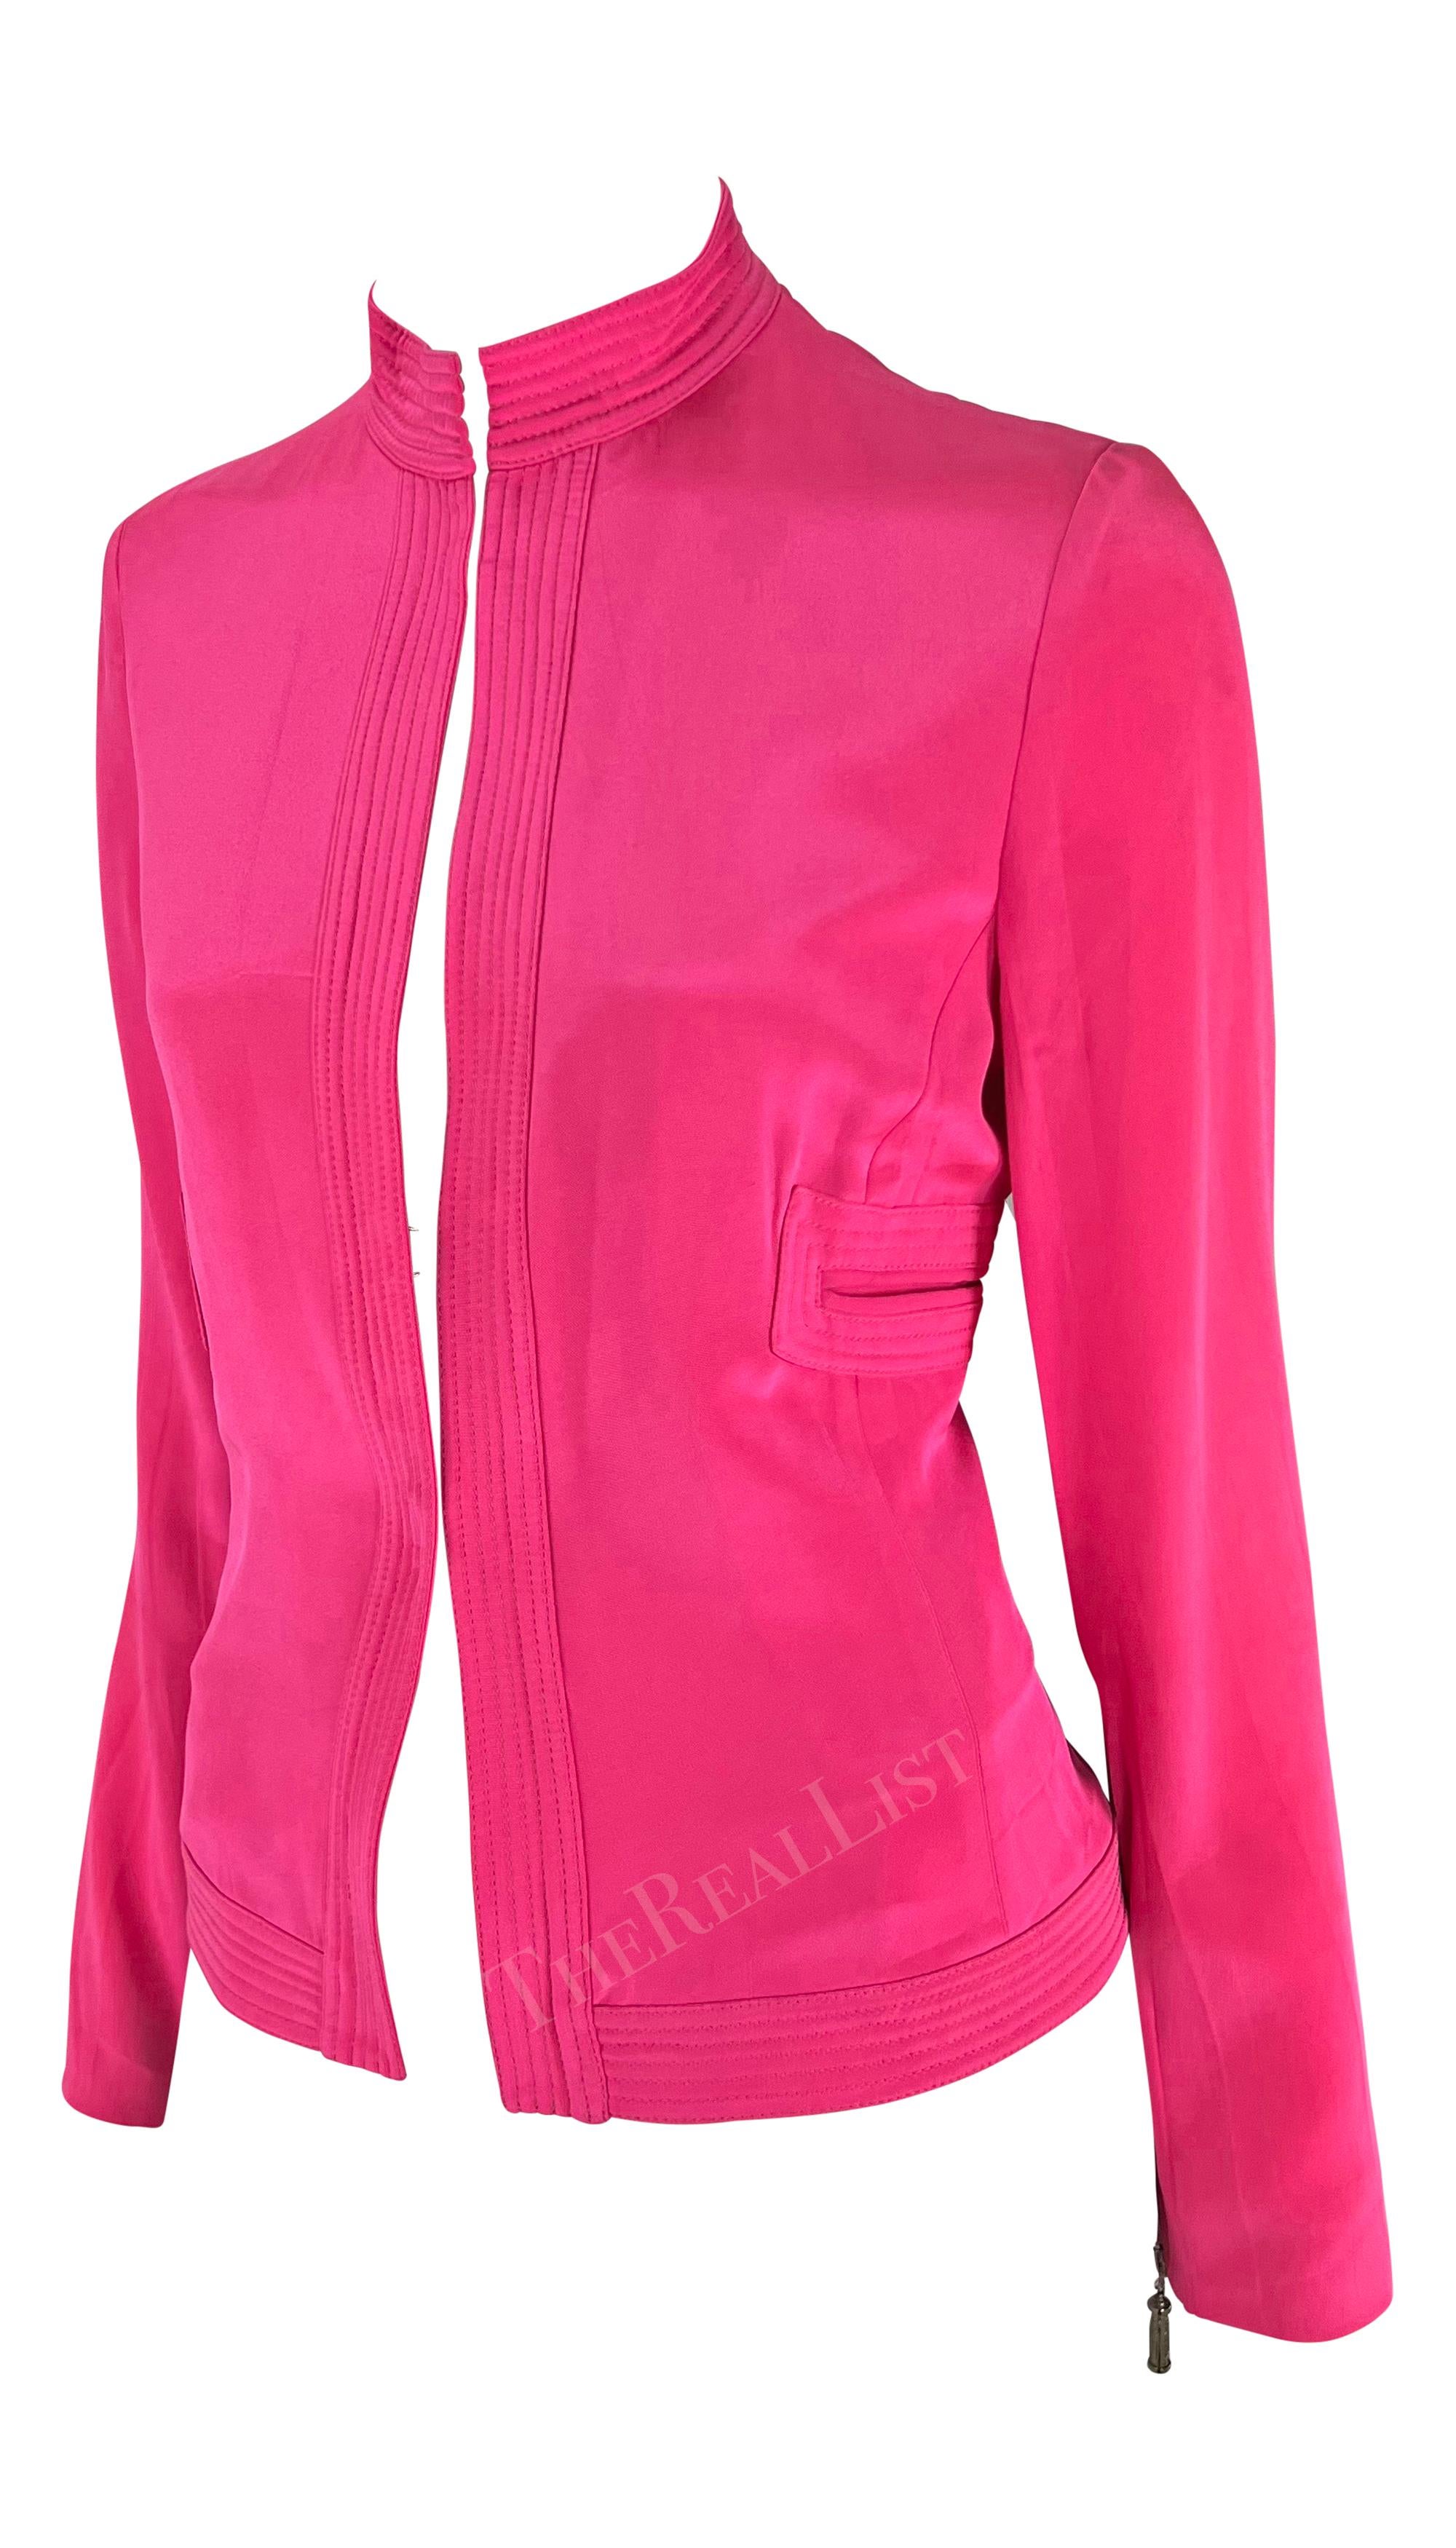 Women's S/S 2003 Gianni Versace by Donatella Runway Hot Pink Long Sleeve Jacket  For Sale